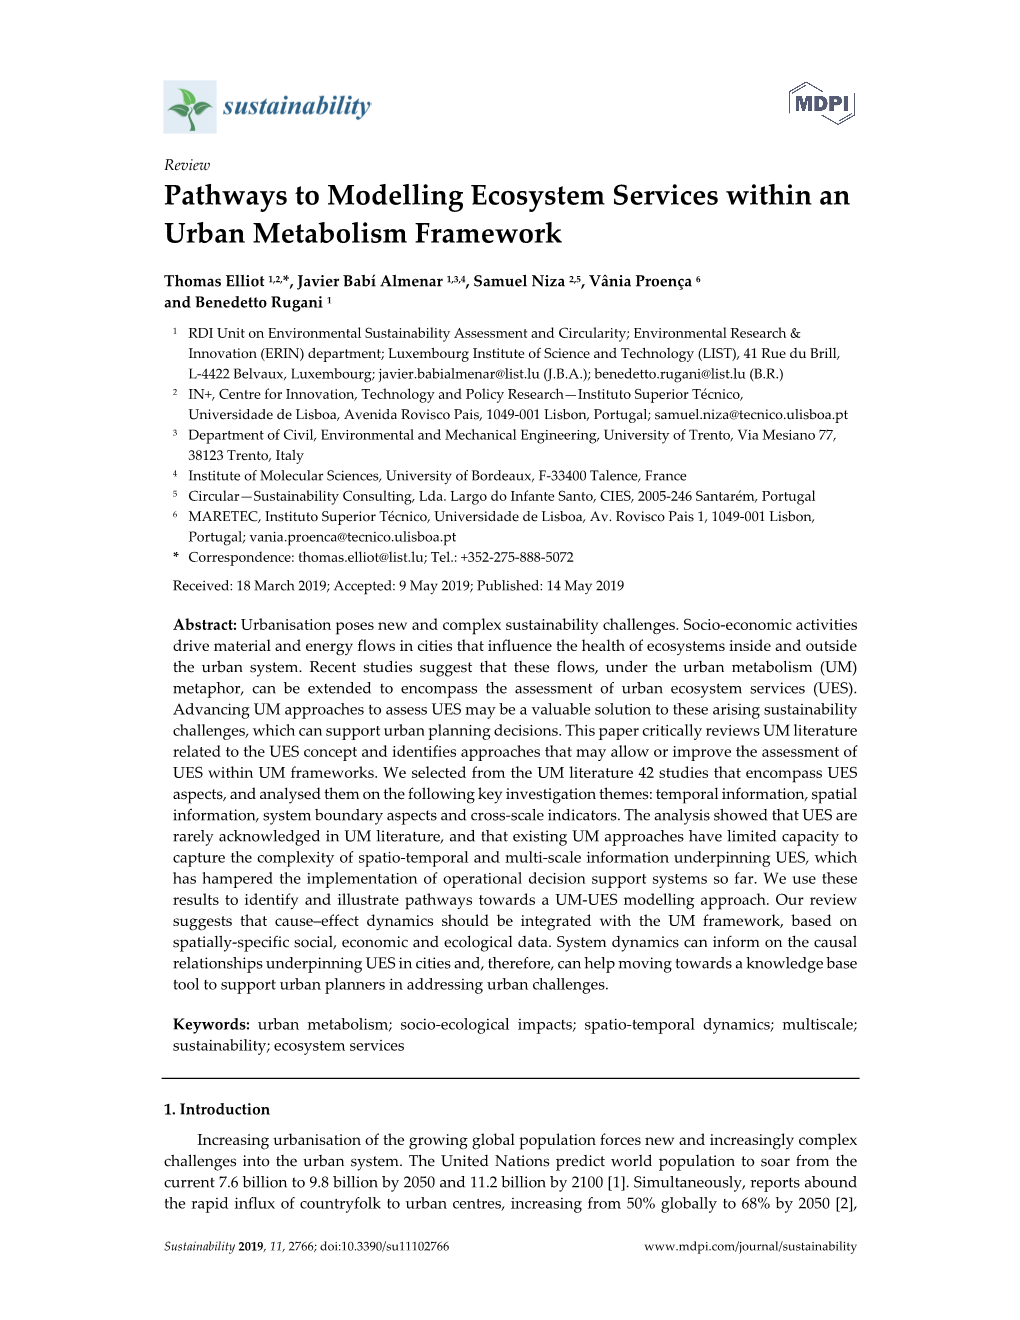 Pathways to Modelling Ecosystem Services Within an Urban Metabolism Framework